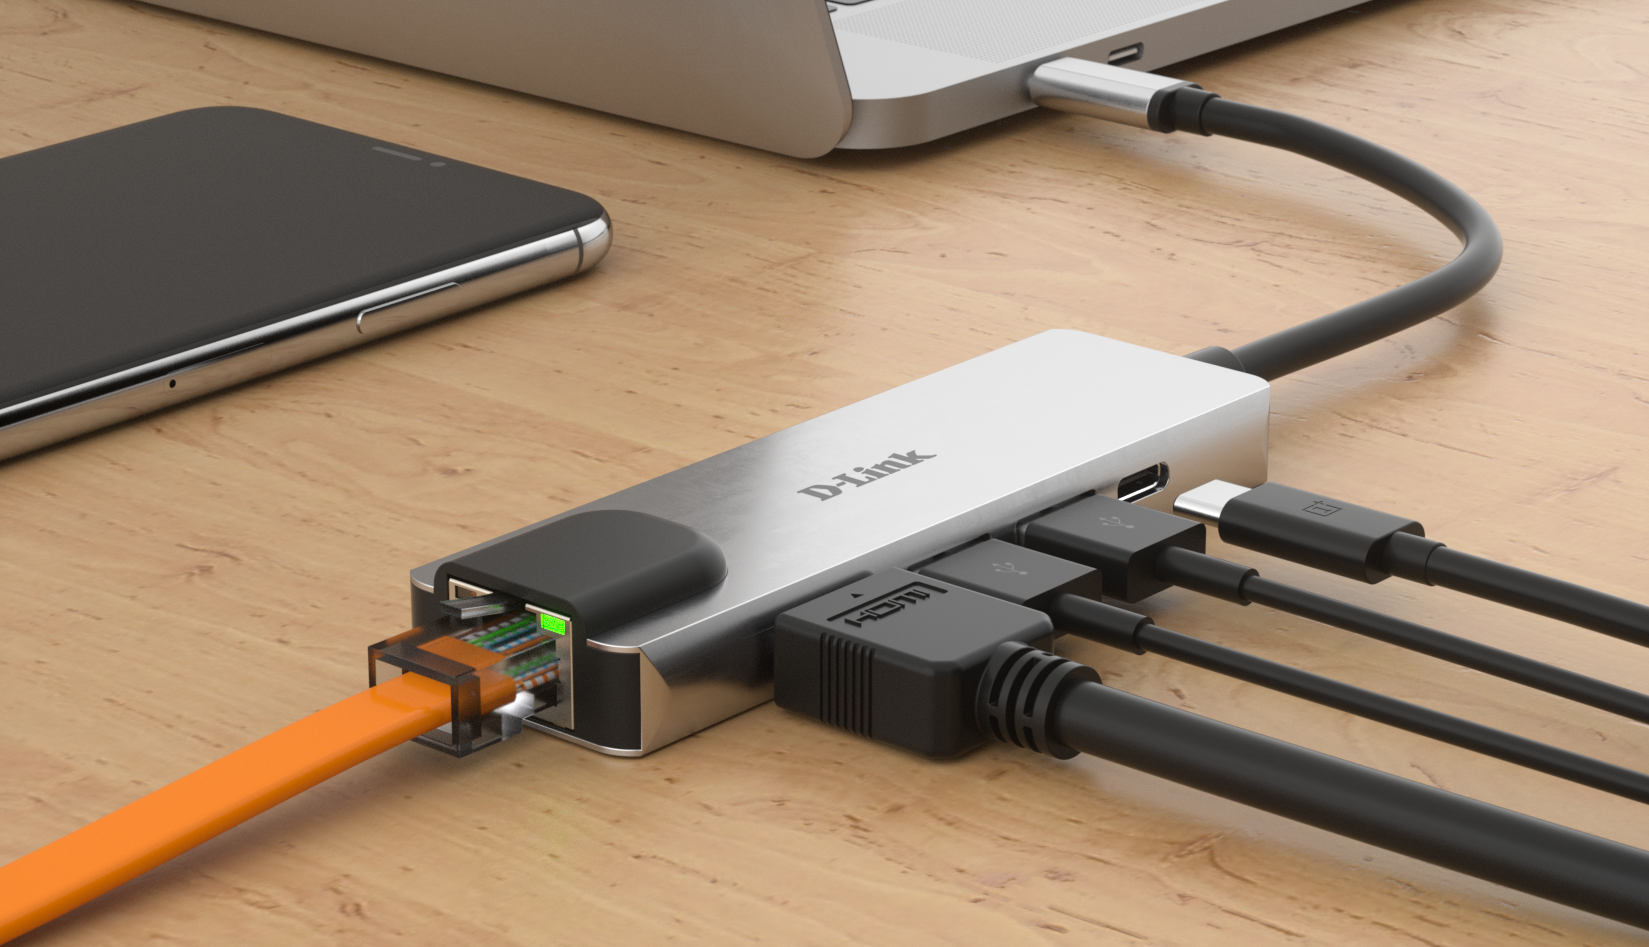 DUB-M520 5-in-1 USB-C Hub with HDMI/Ethernet and Power Delivery - showing example connections connected to a laptop on a desk